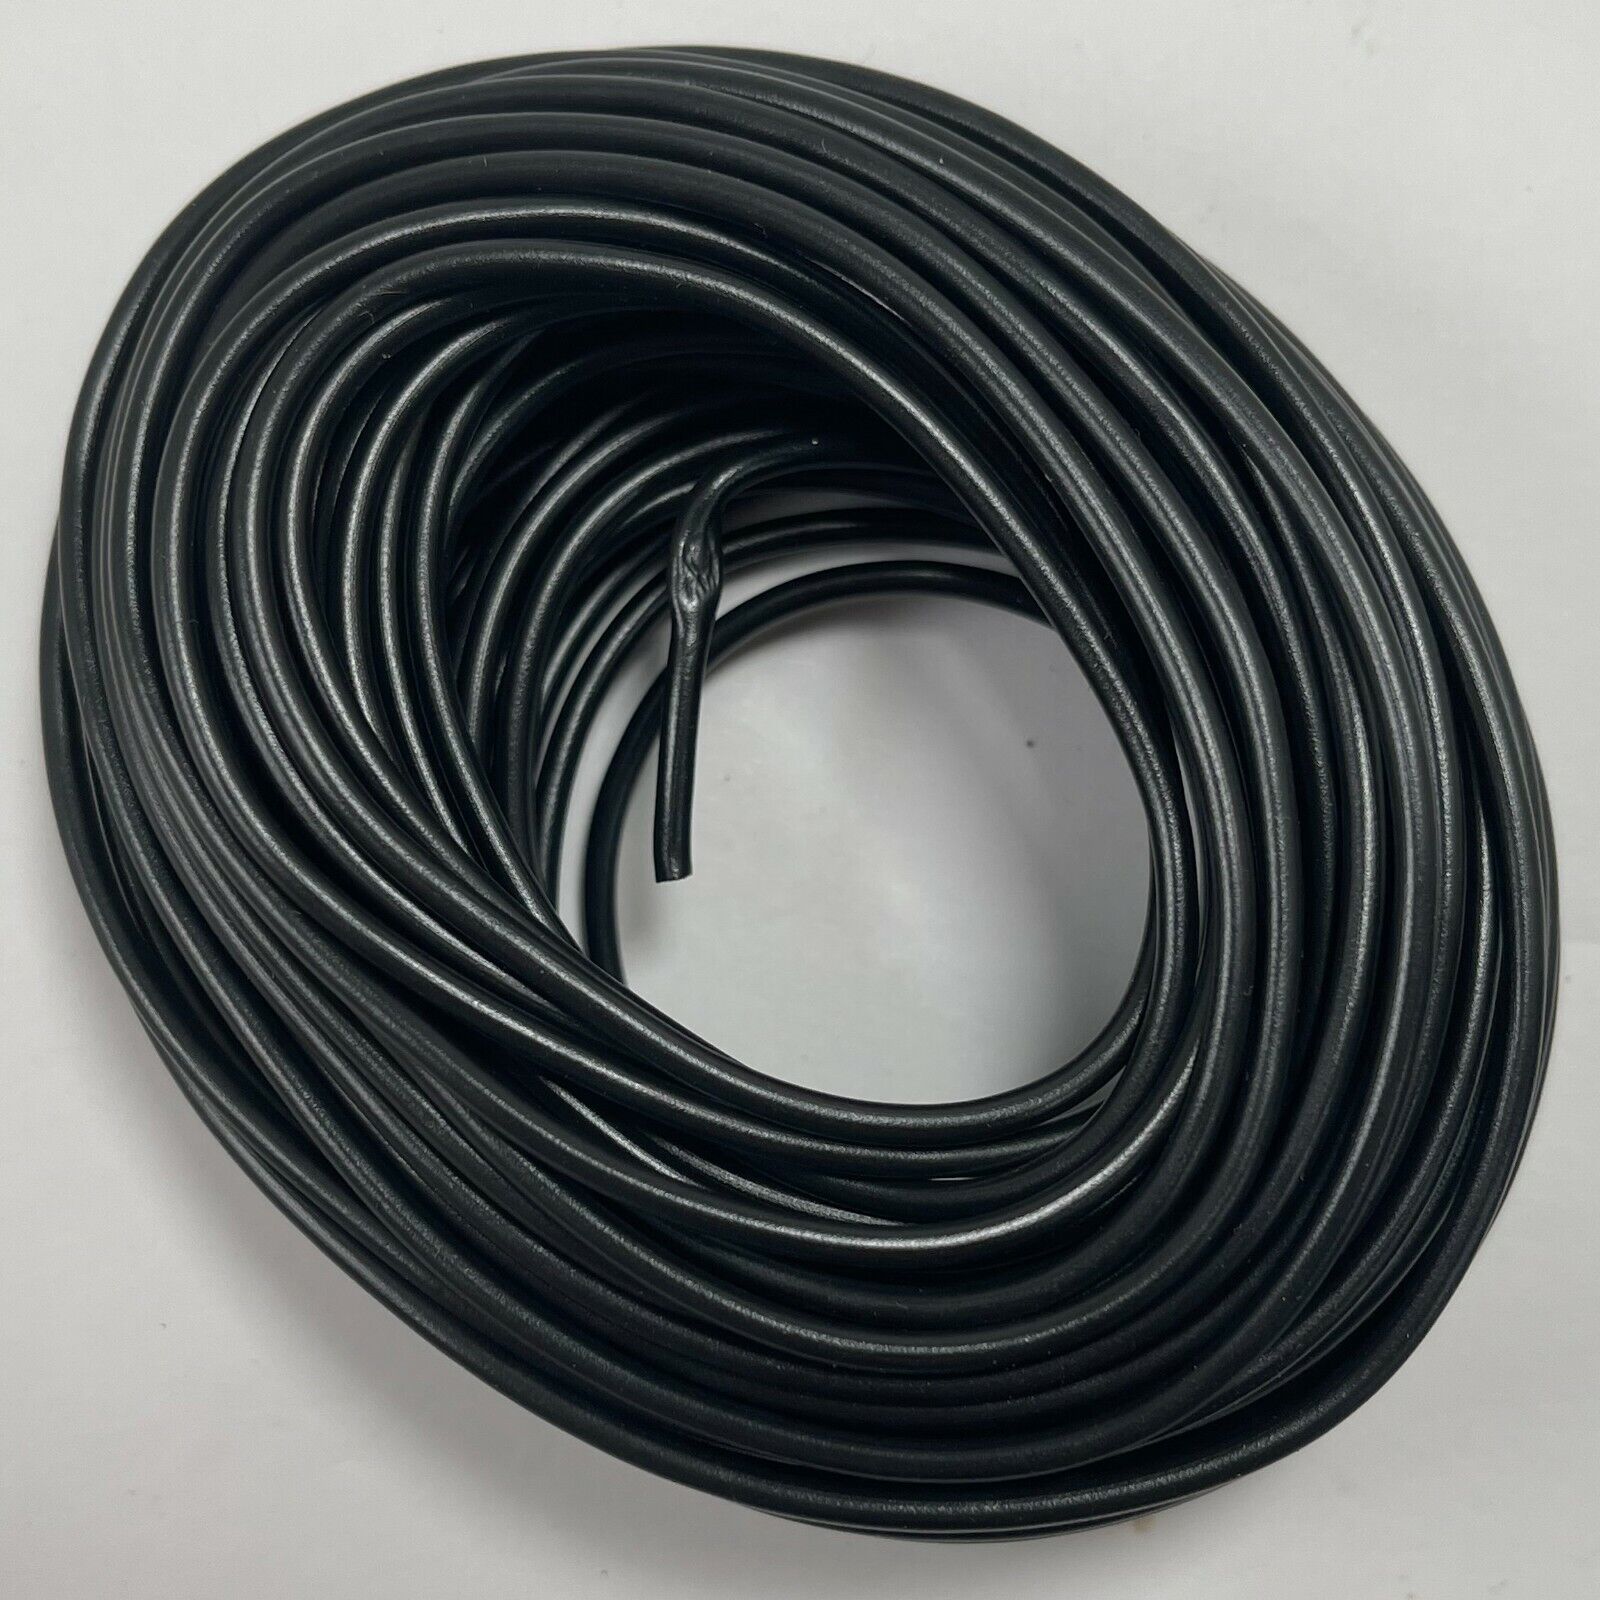 2 Pack of Automotive Primary Wire 12 Gauge 15 FT - Black